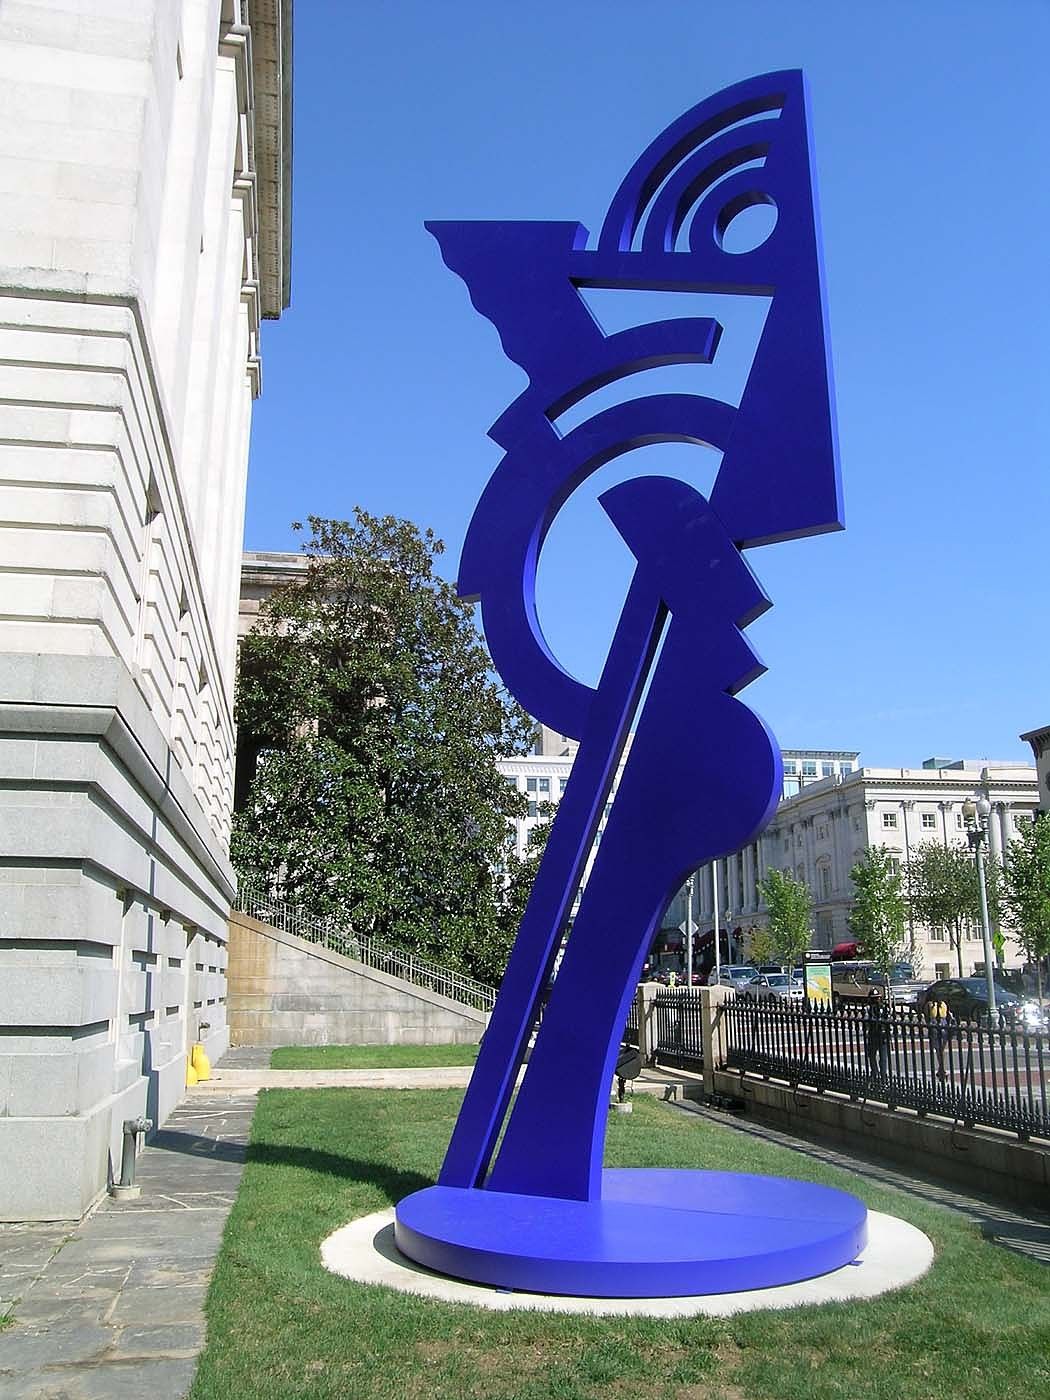 A large-scale blue sculpture of an angular, abstracted head installed outdoors